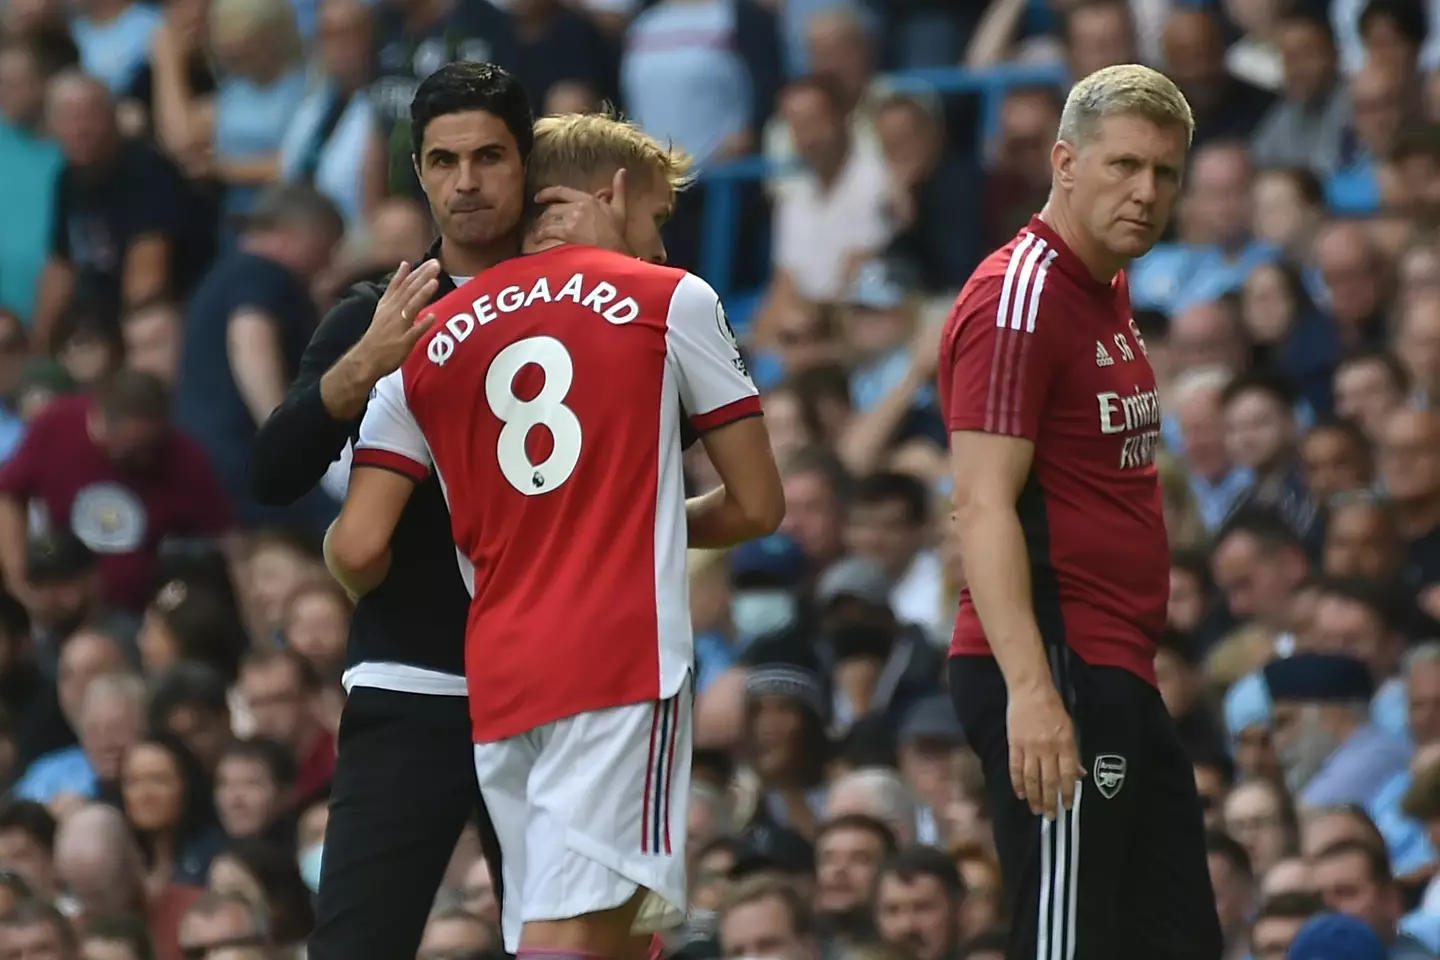 Both Arteta and Odegaard will be hoping the club's fortunes change.